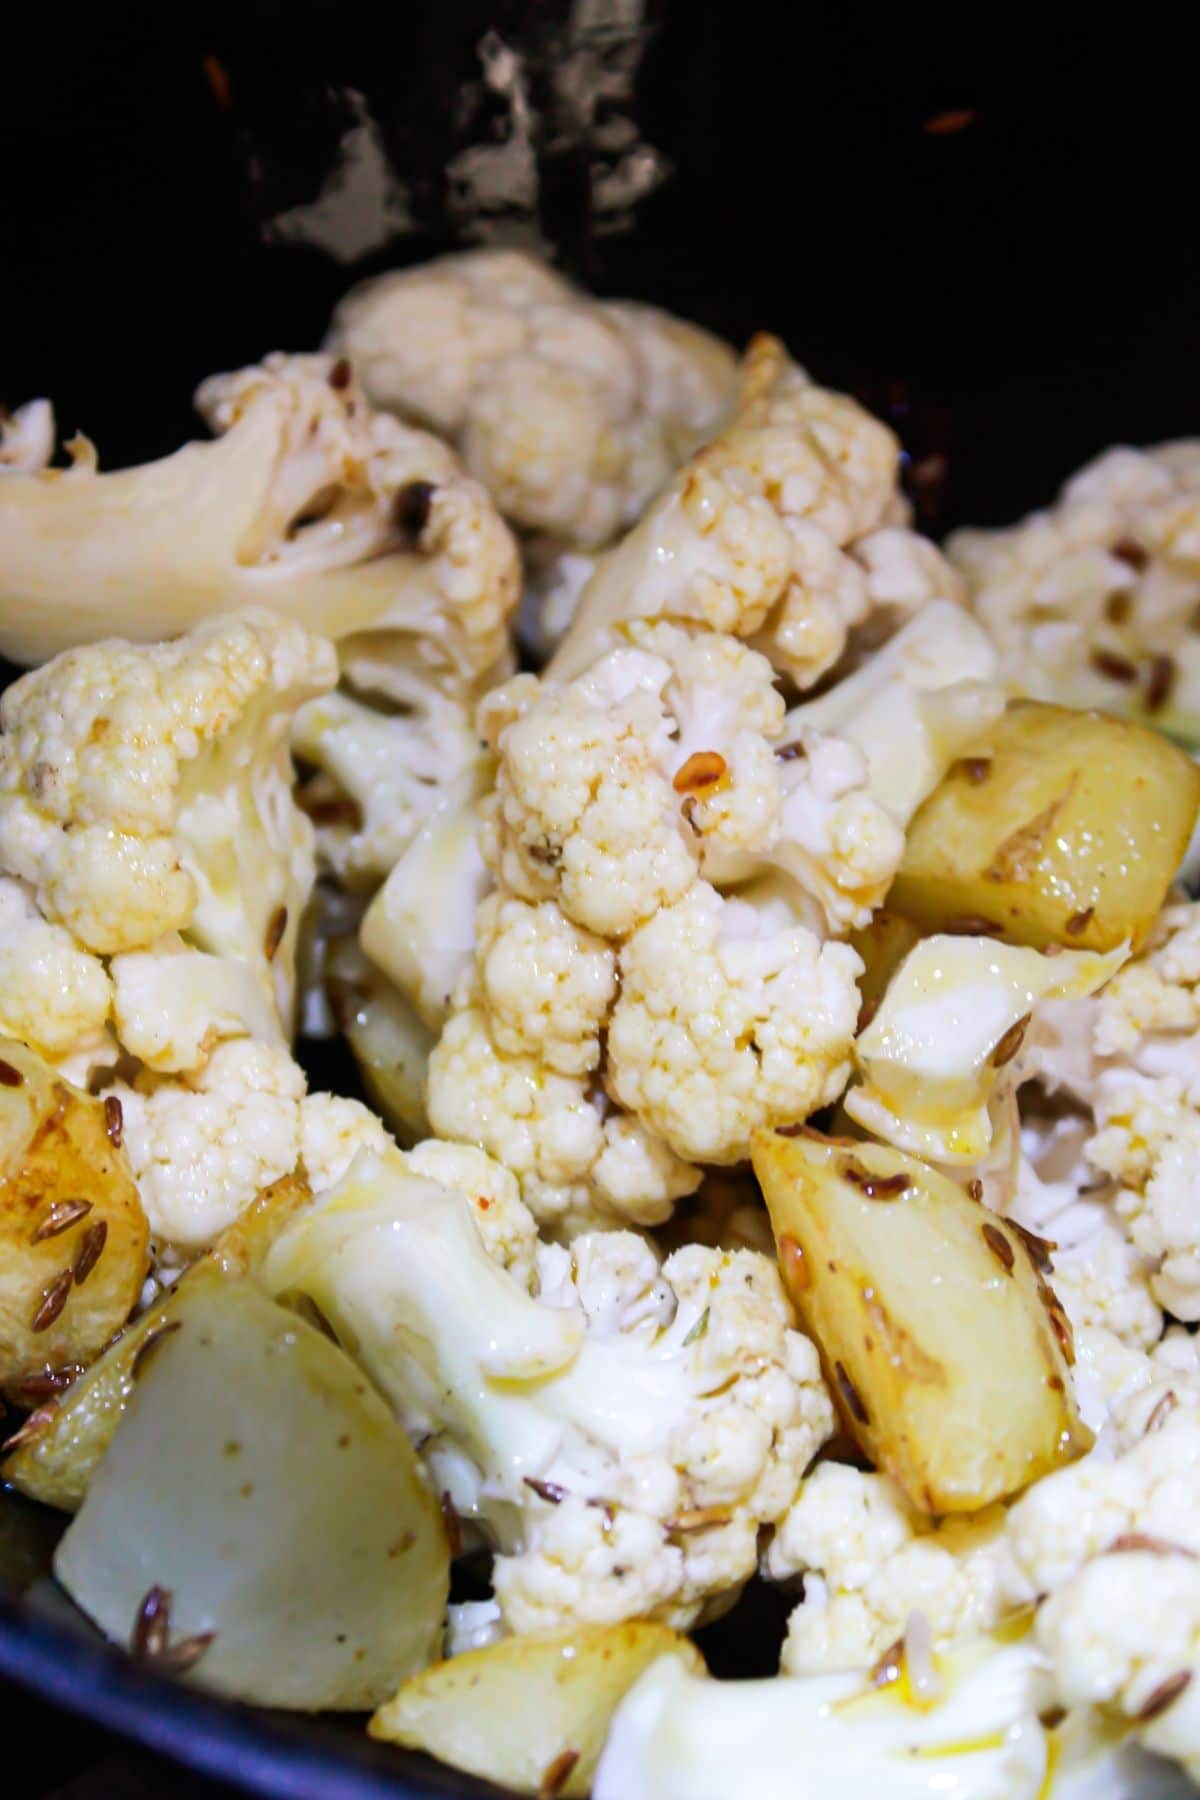 Cauliflower and potato pieces in skillet